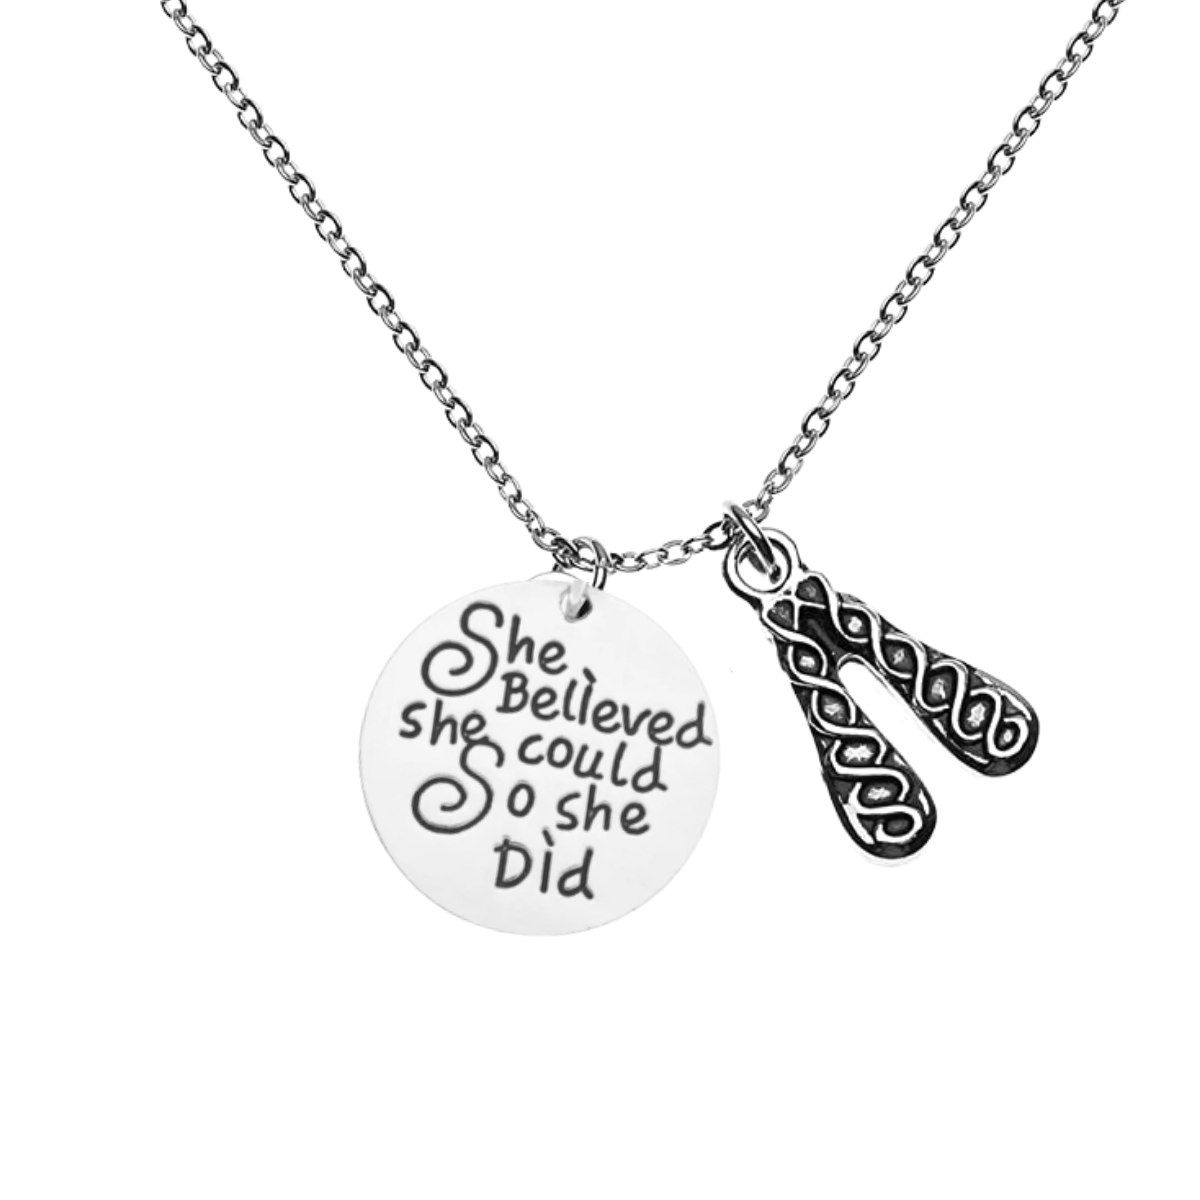 Irish Dance Necklace - She Did Believed She Could